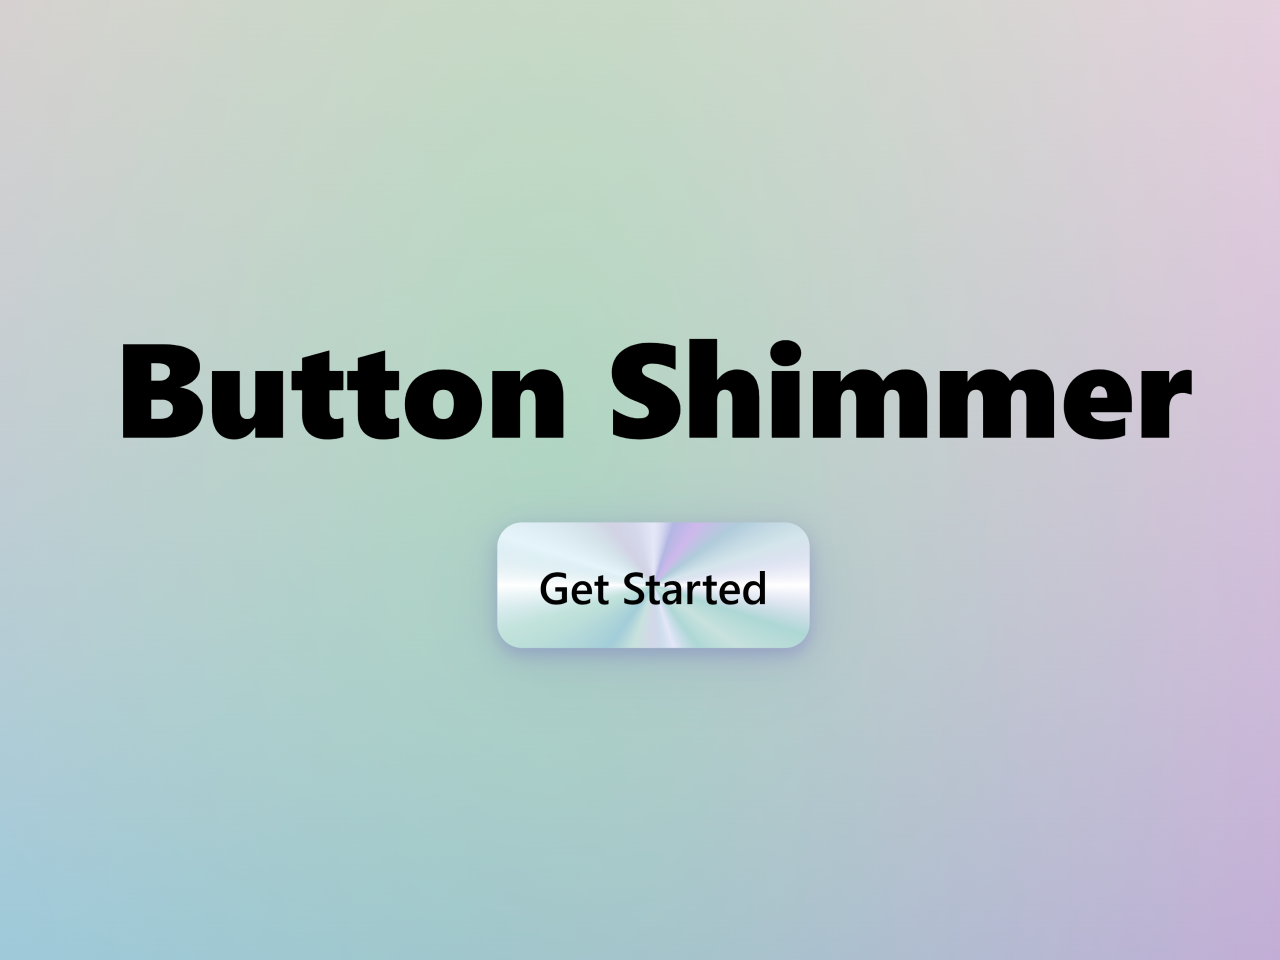 Button Shimmer Effect on Hover Using CSS